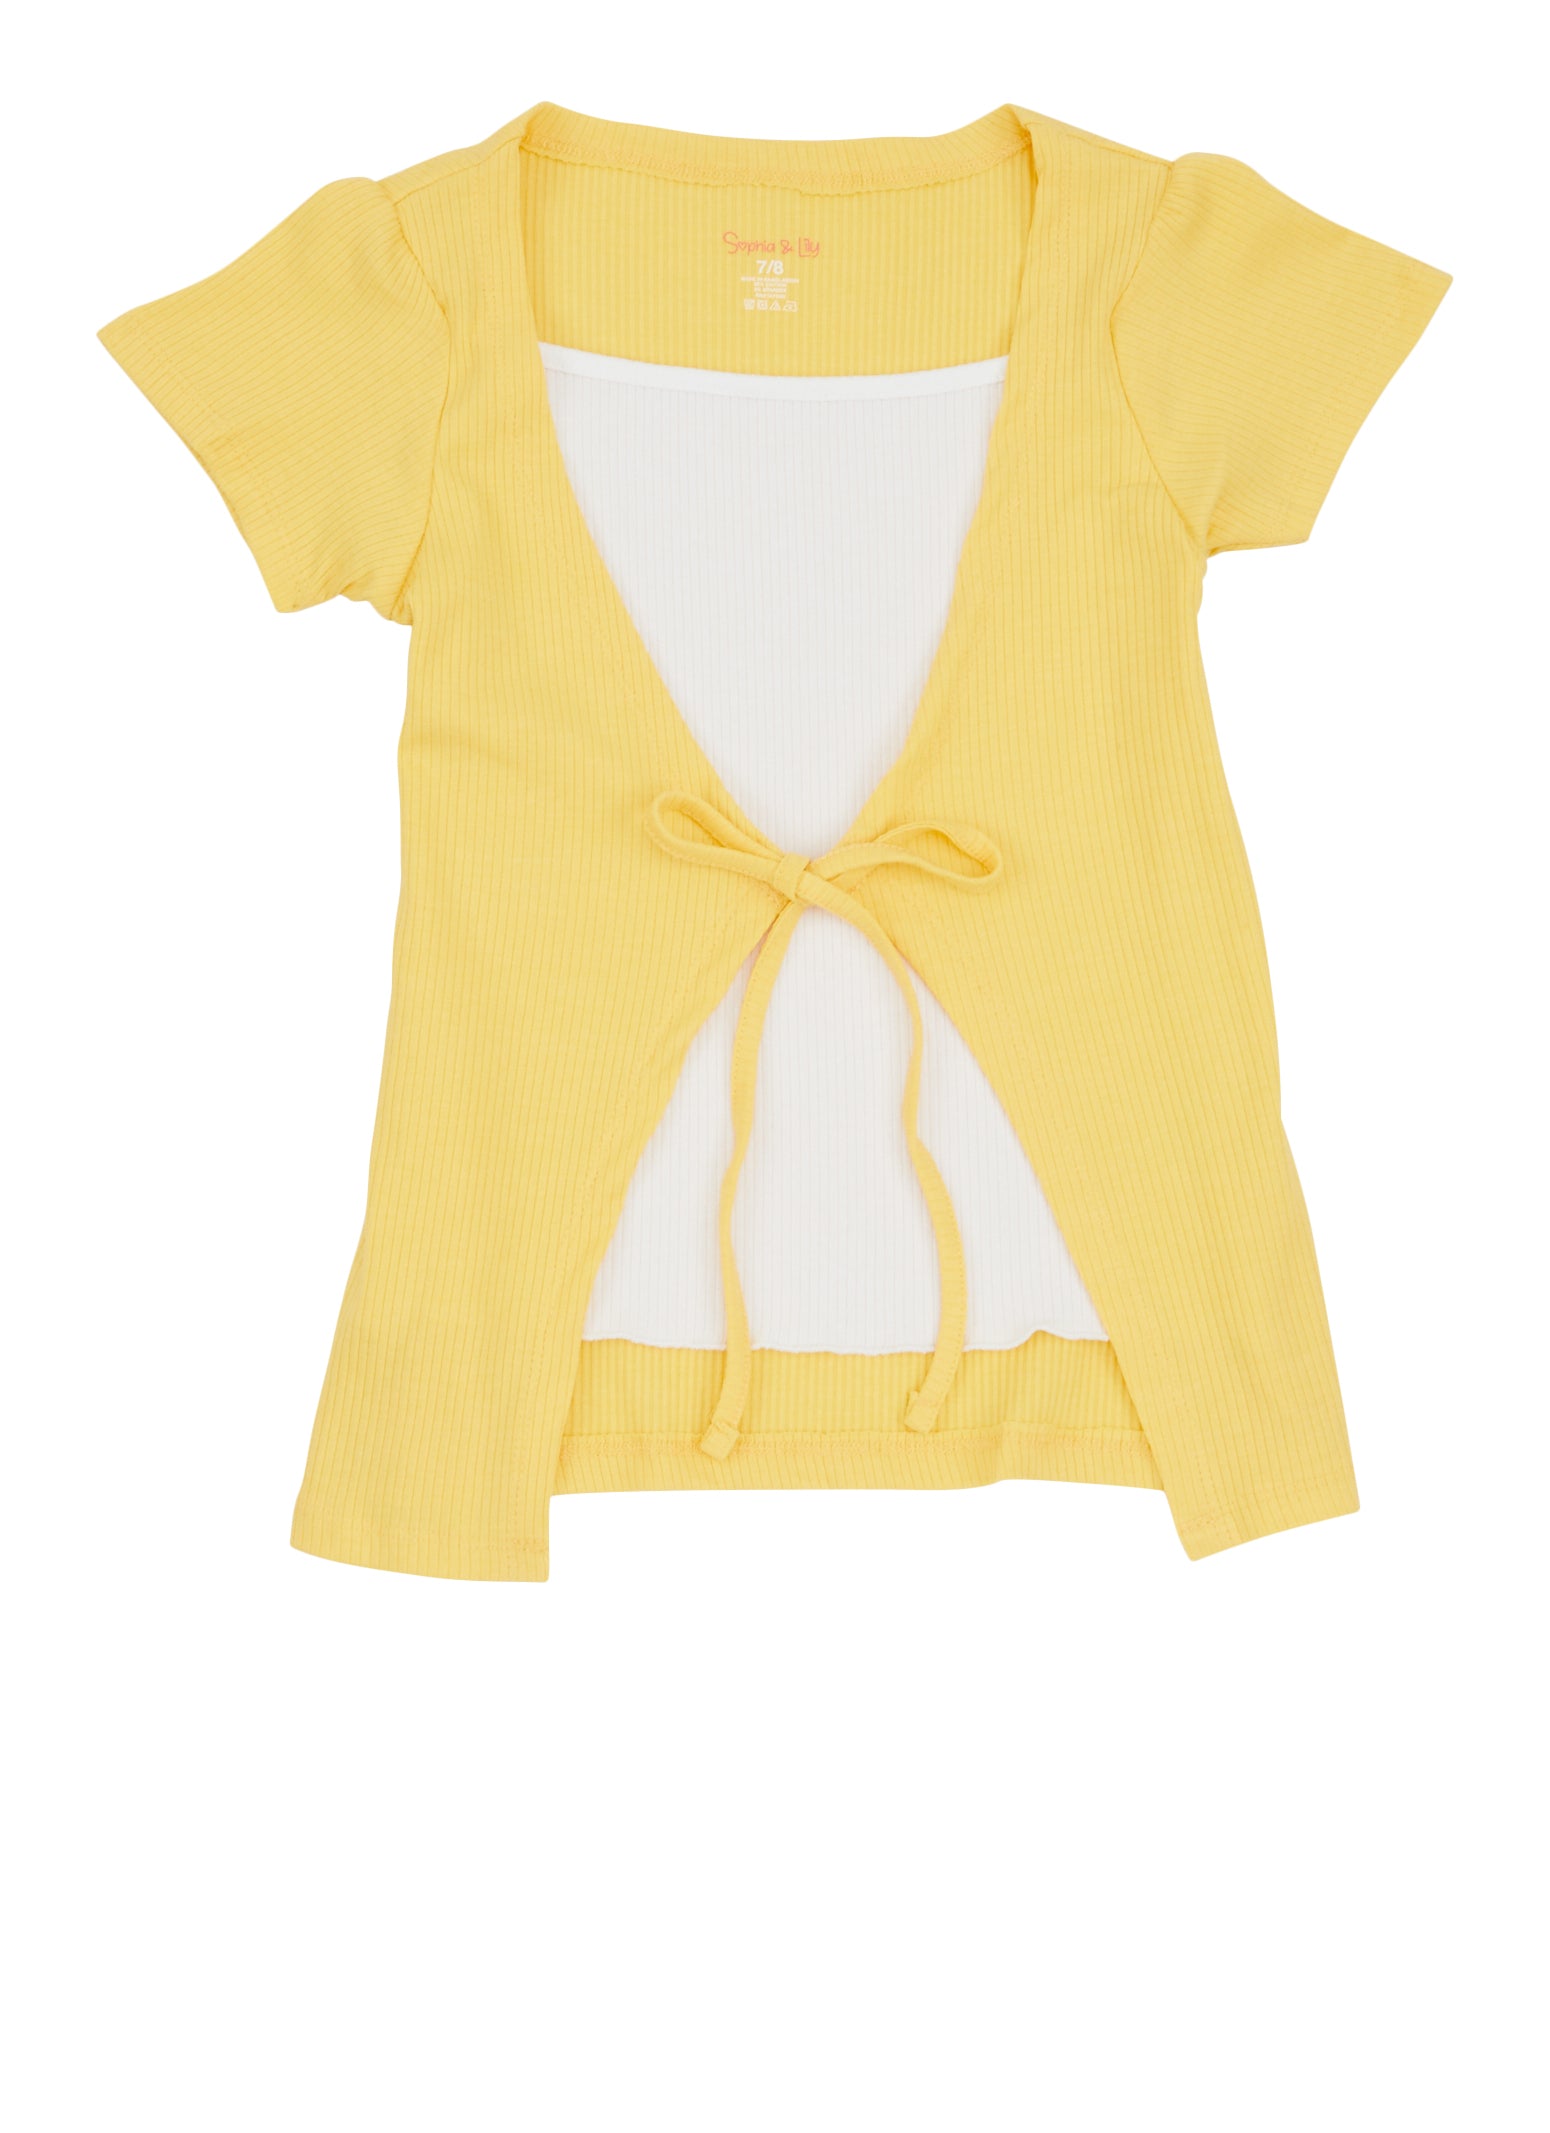 Girls Color Block Rib Knit Tie Front Top, Yellow, Size 10-12